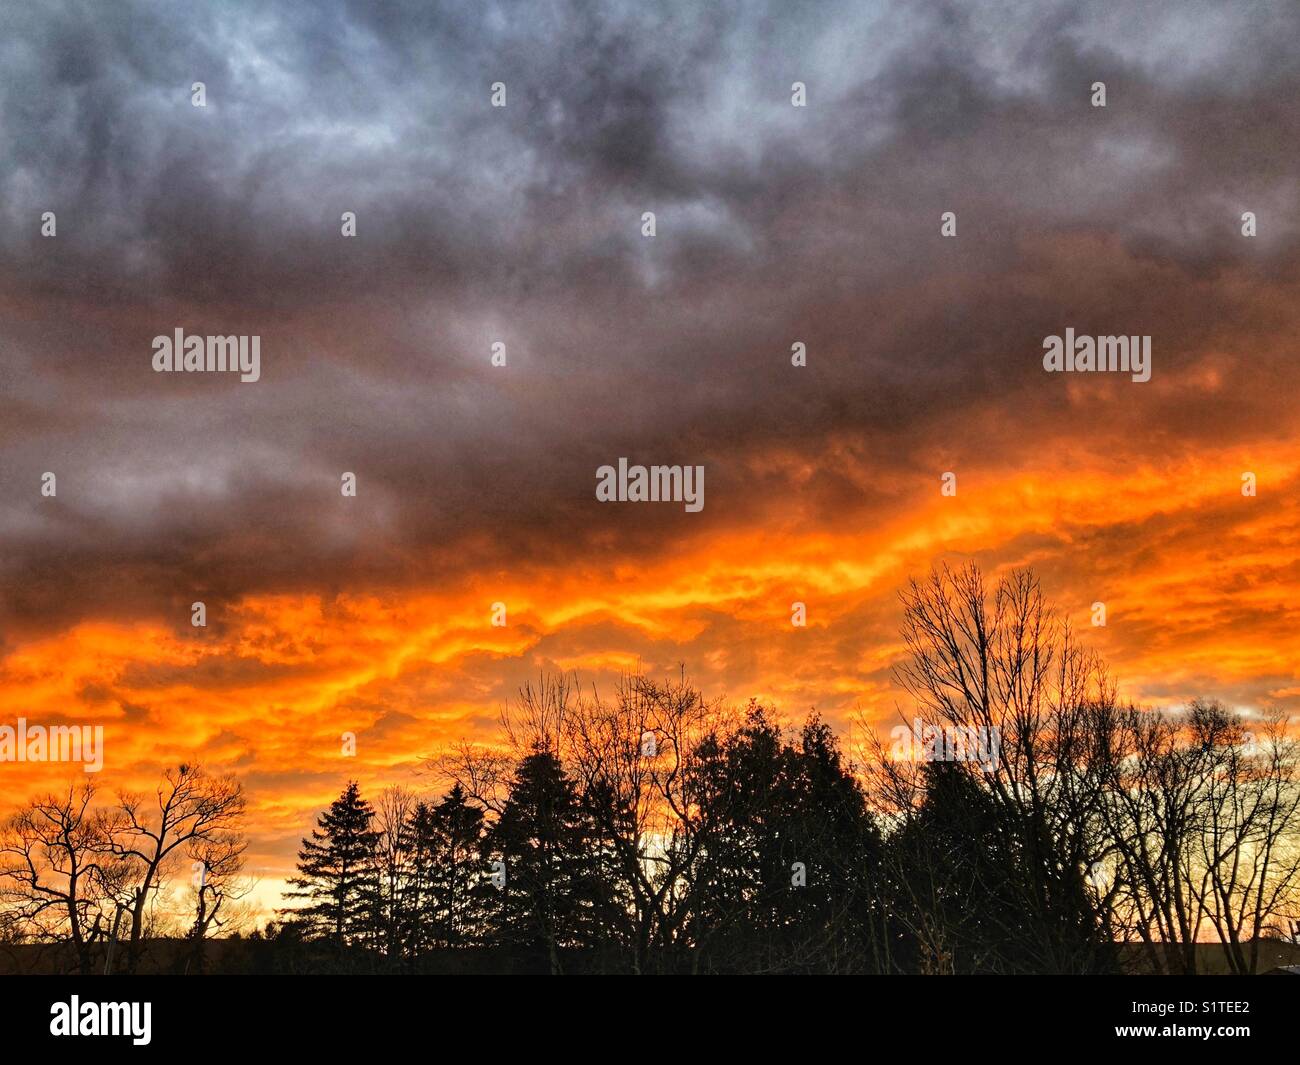 Morning sunrise looking like fire with dark ominous clouds above and silhouetted trees below Stock Photo